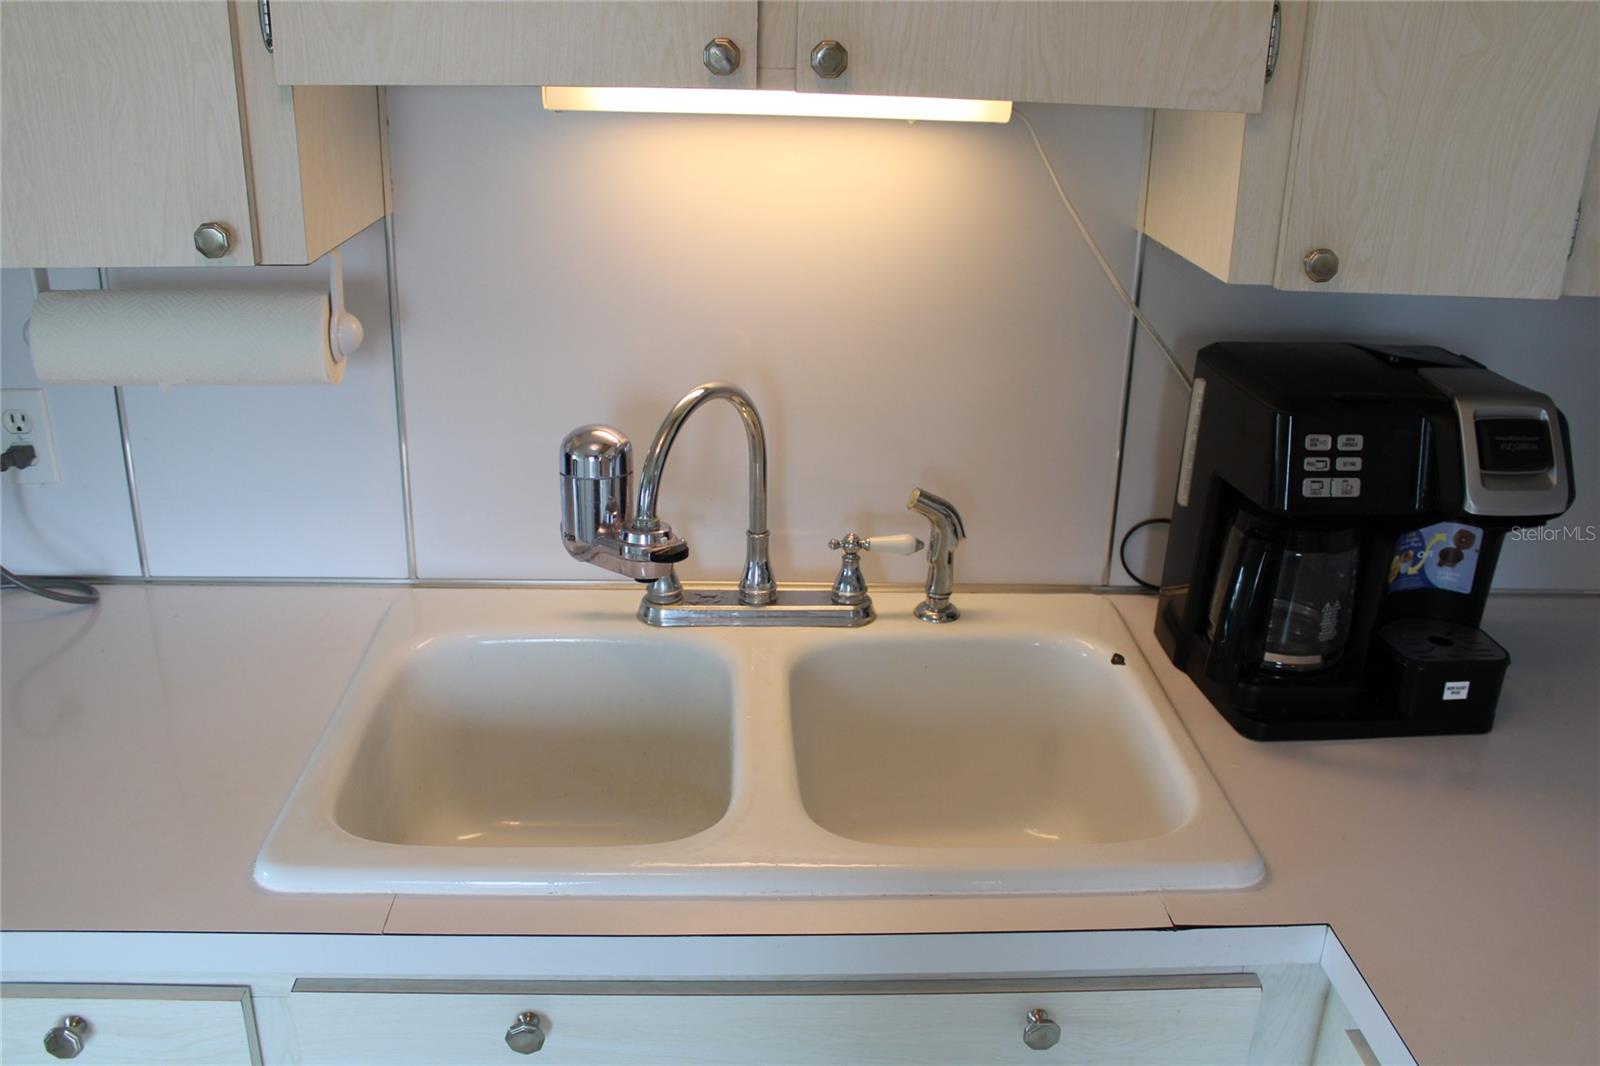 Dual sinks with ample lighting